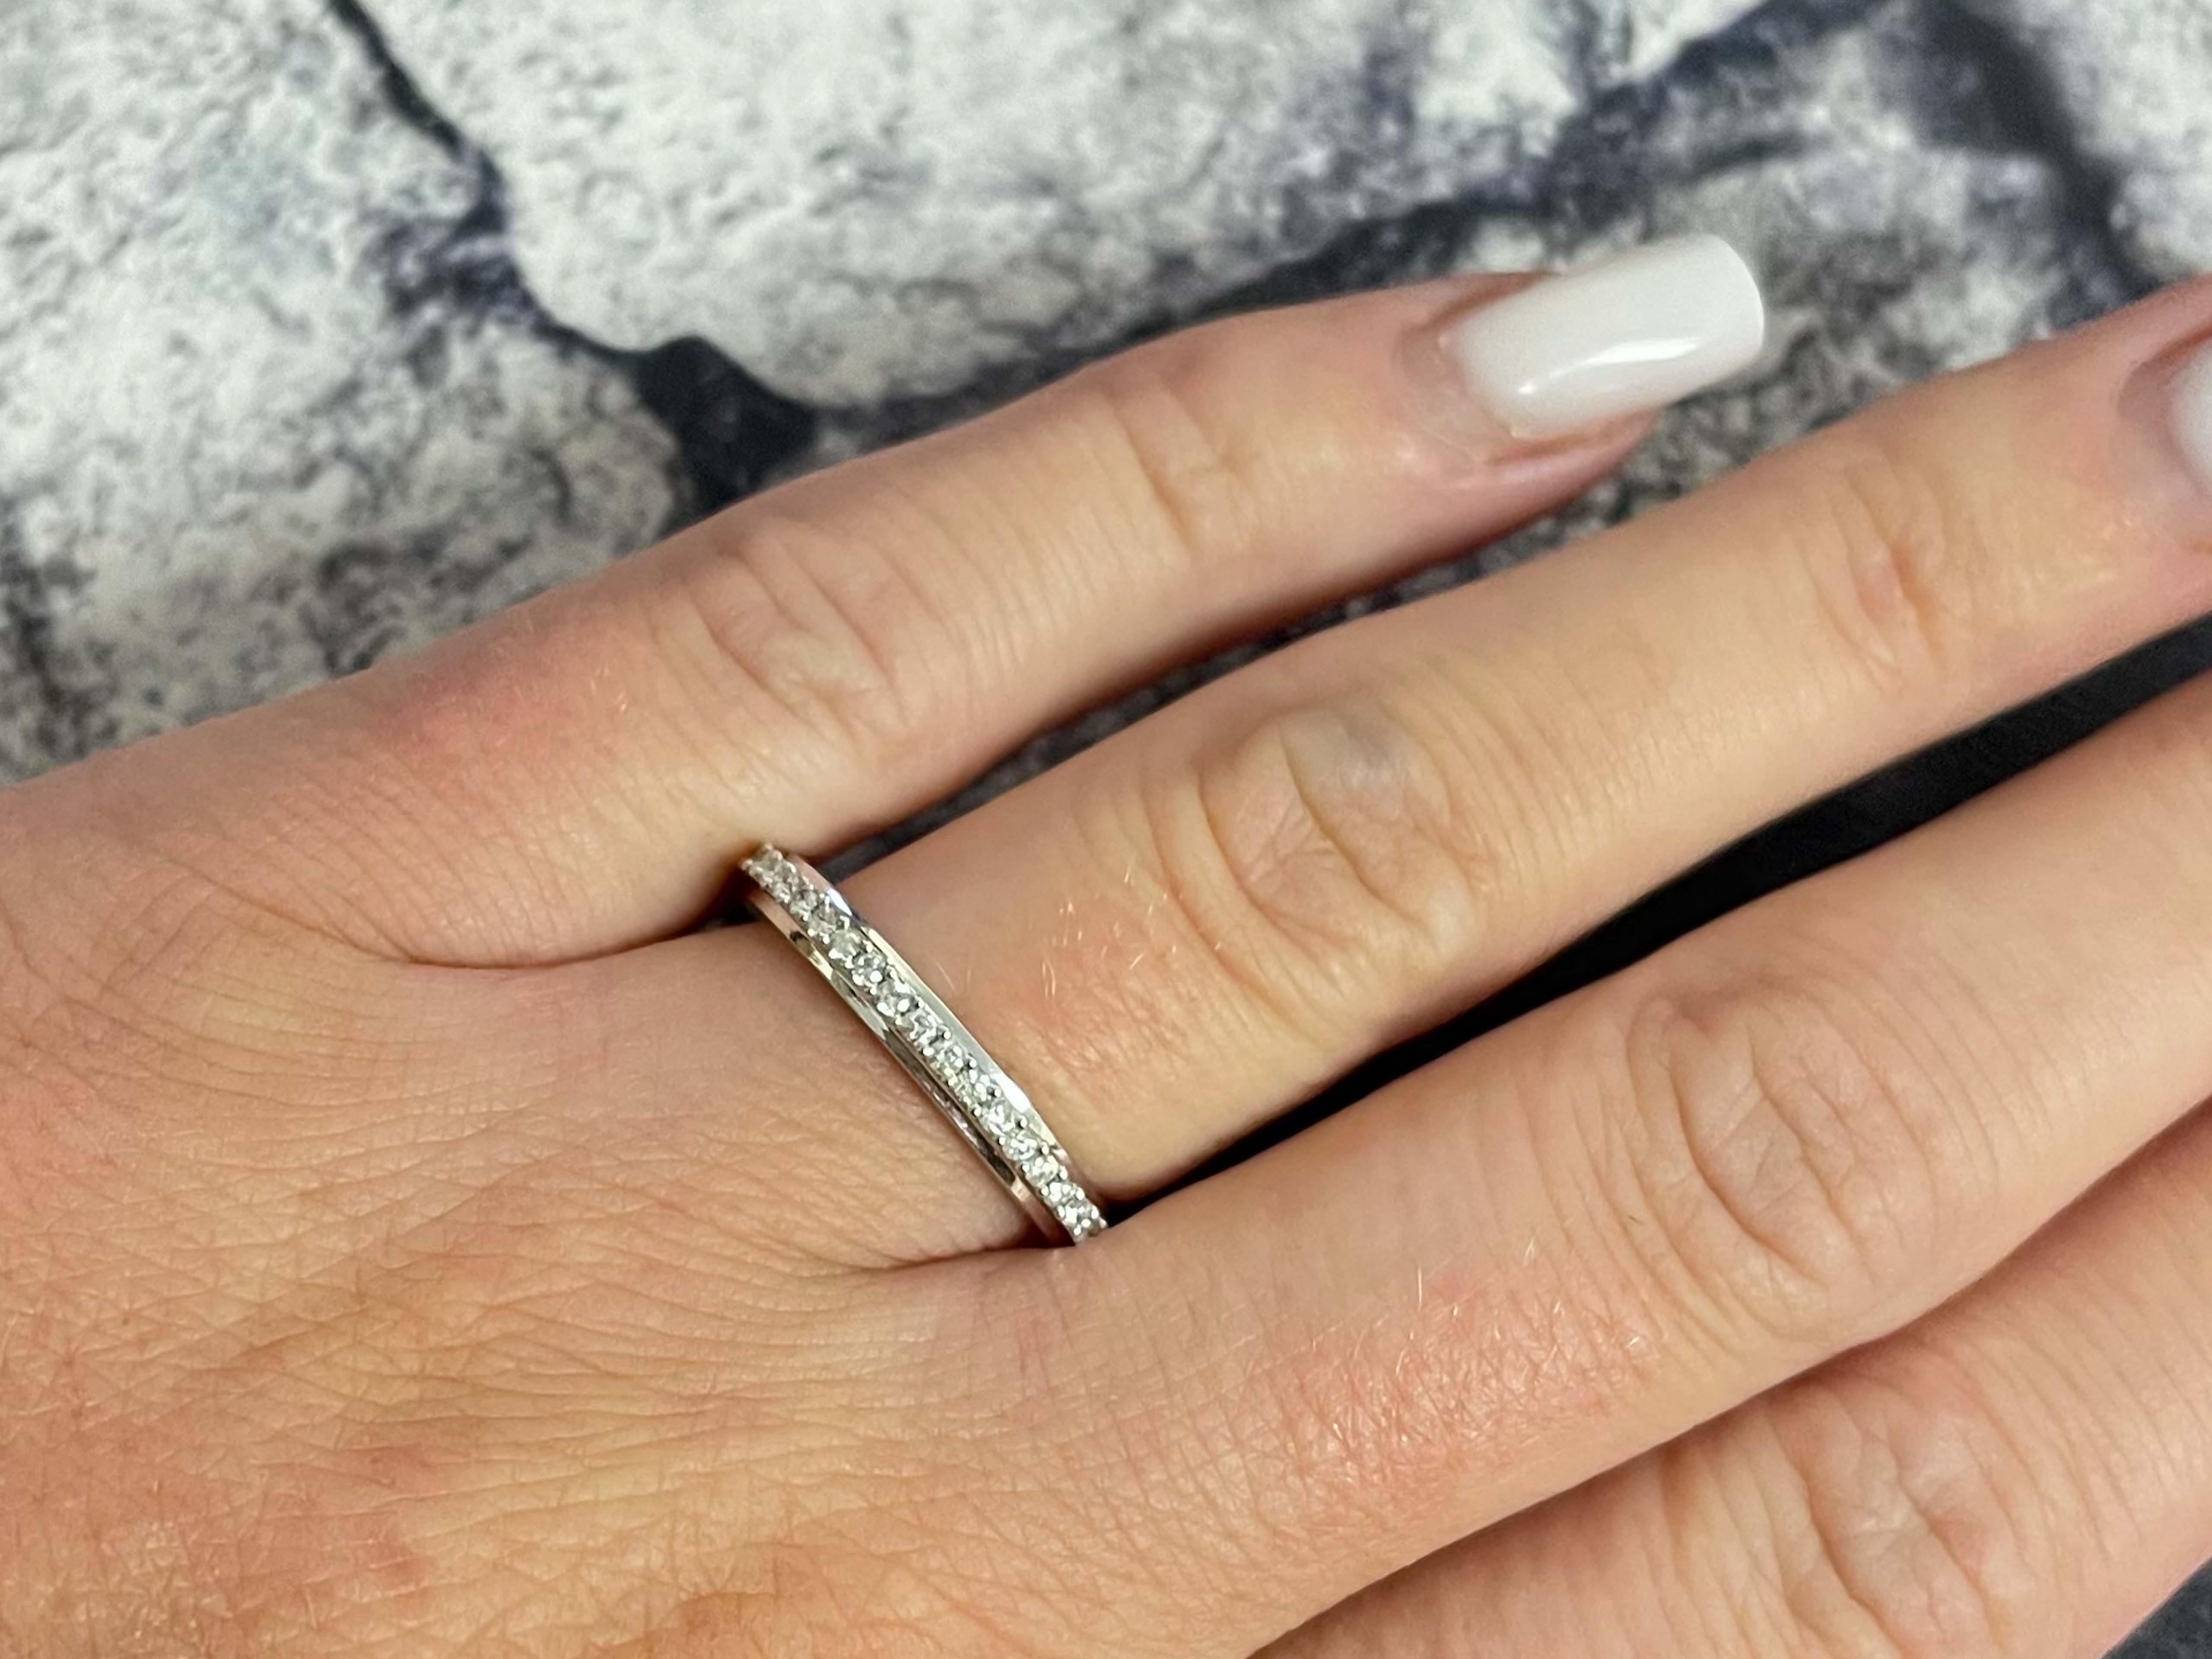 Item Specifications:

Metal: 18k White Gold

Diamond Count: 45 brilliant cut

Total Diamond Carat Weight: 0.50 carats 

Diamond Color: G-H

Diamond Clarity: SI

Ring Size: 6.5

Total Weight: 3.4 Grams

Stamped: 